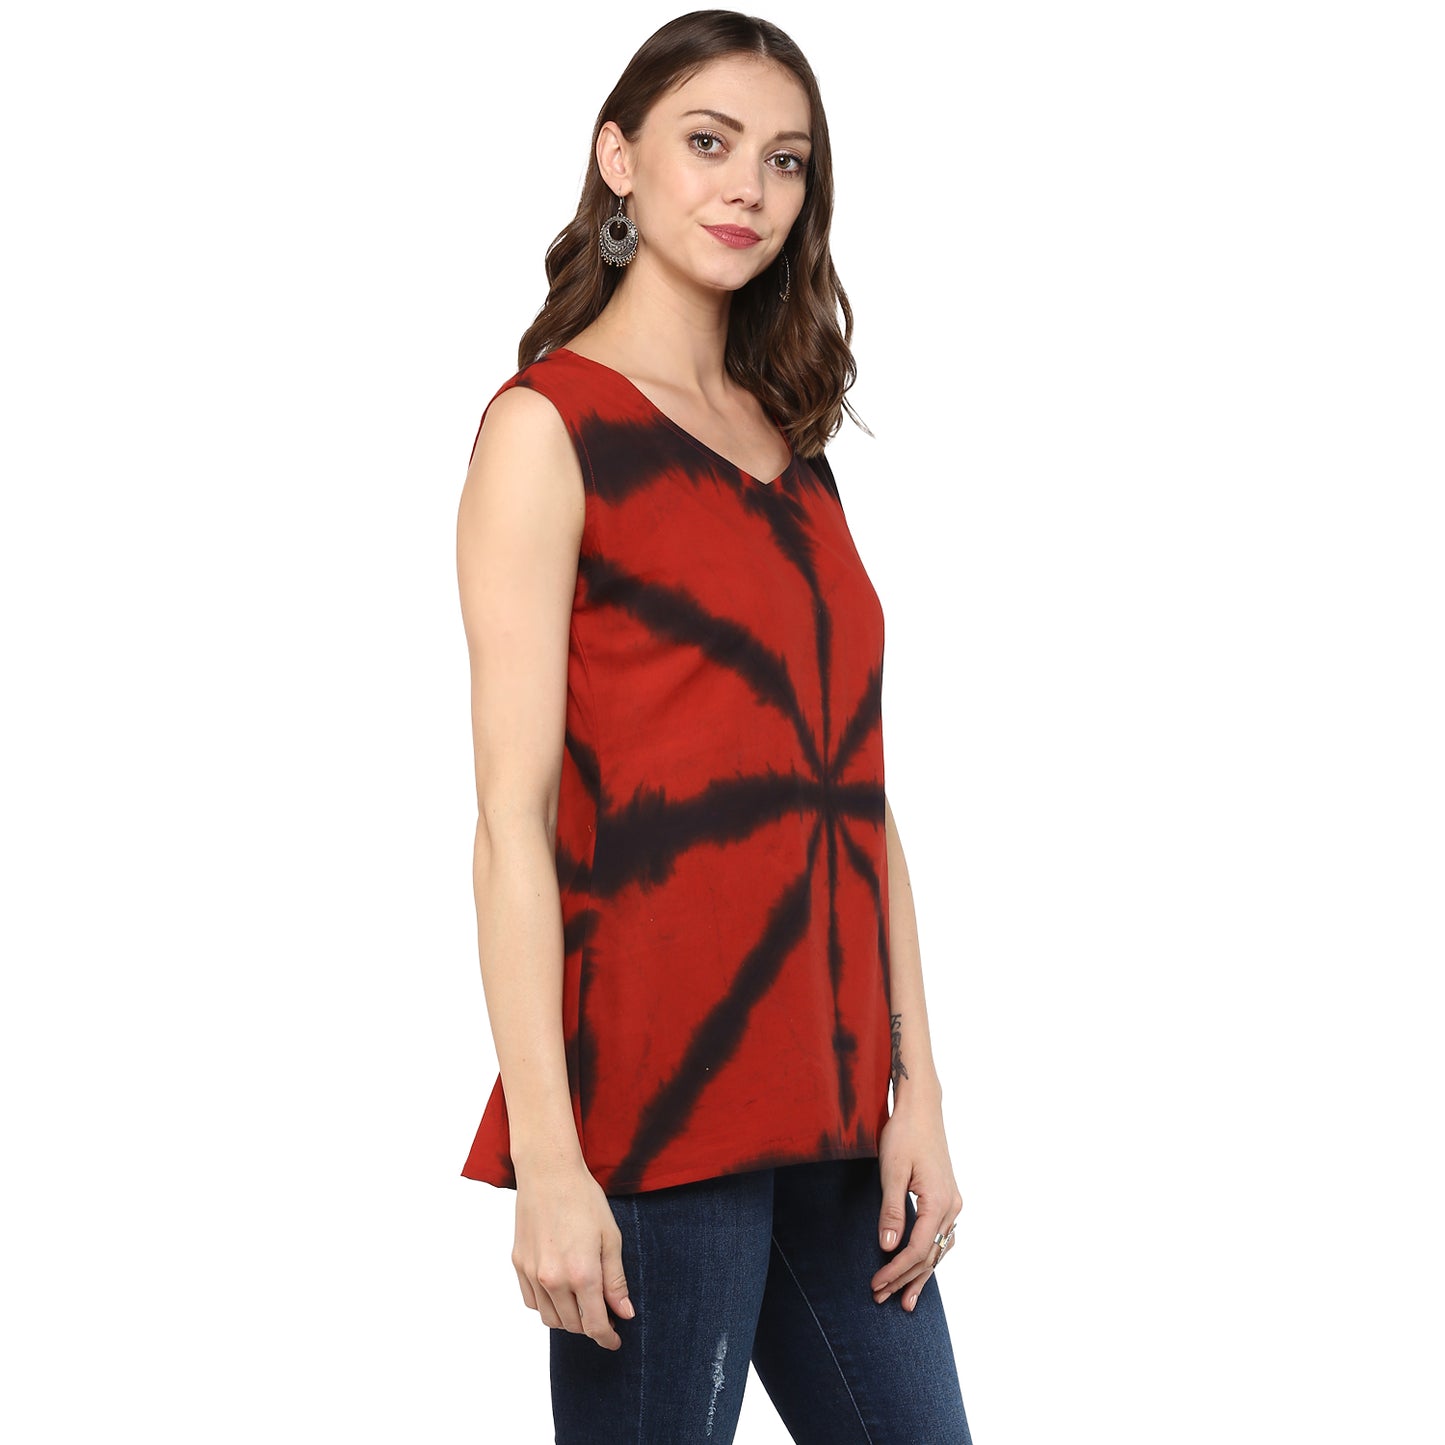 Darzaania Clamp Dyed Tops For Women Online